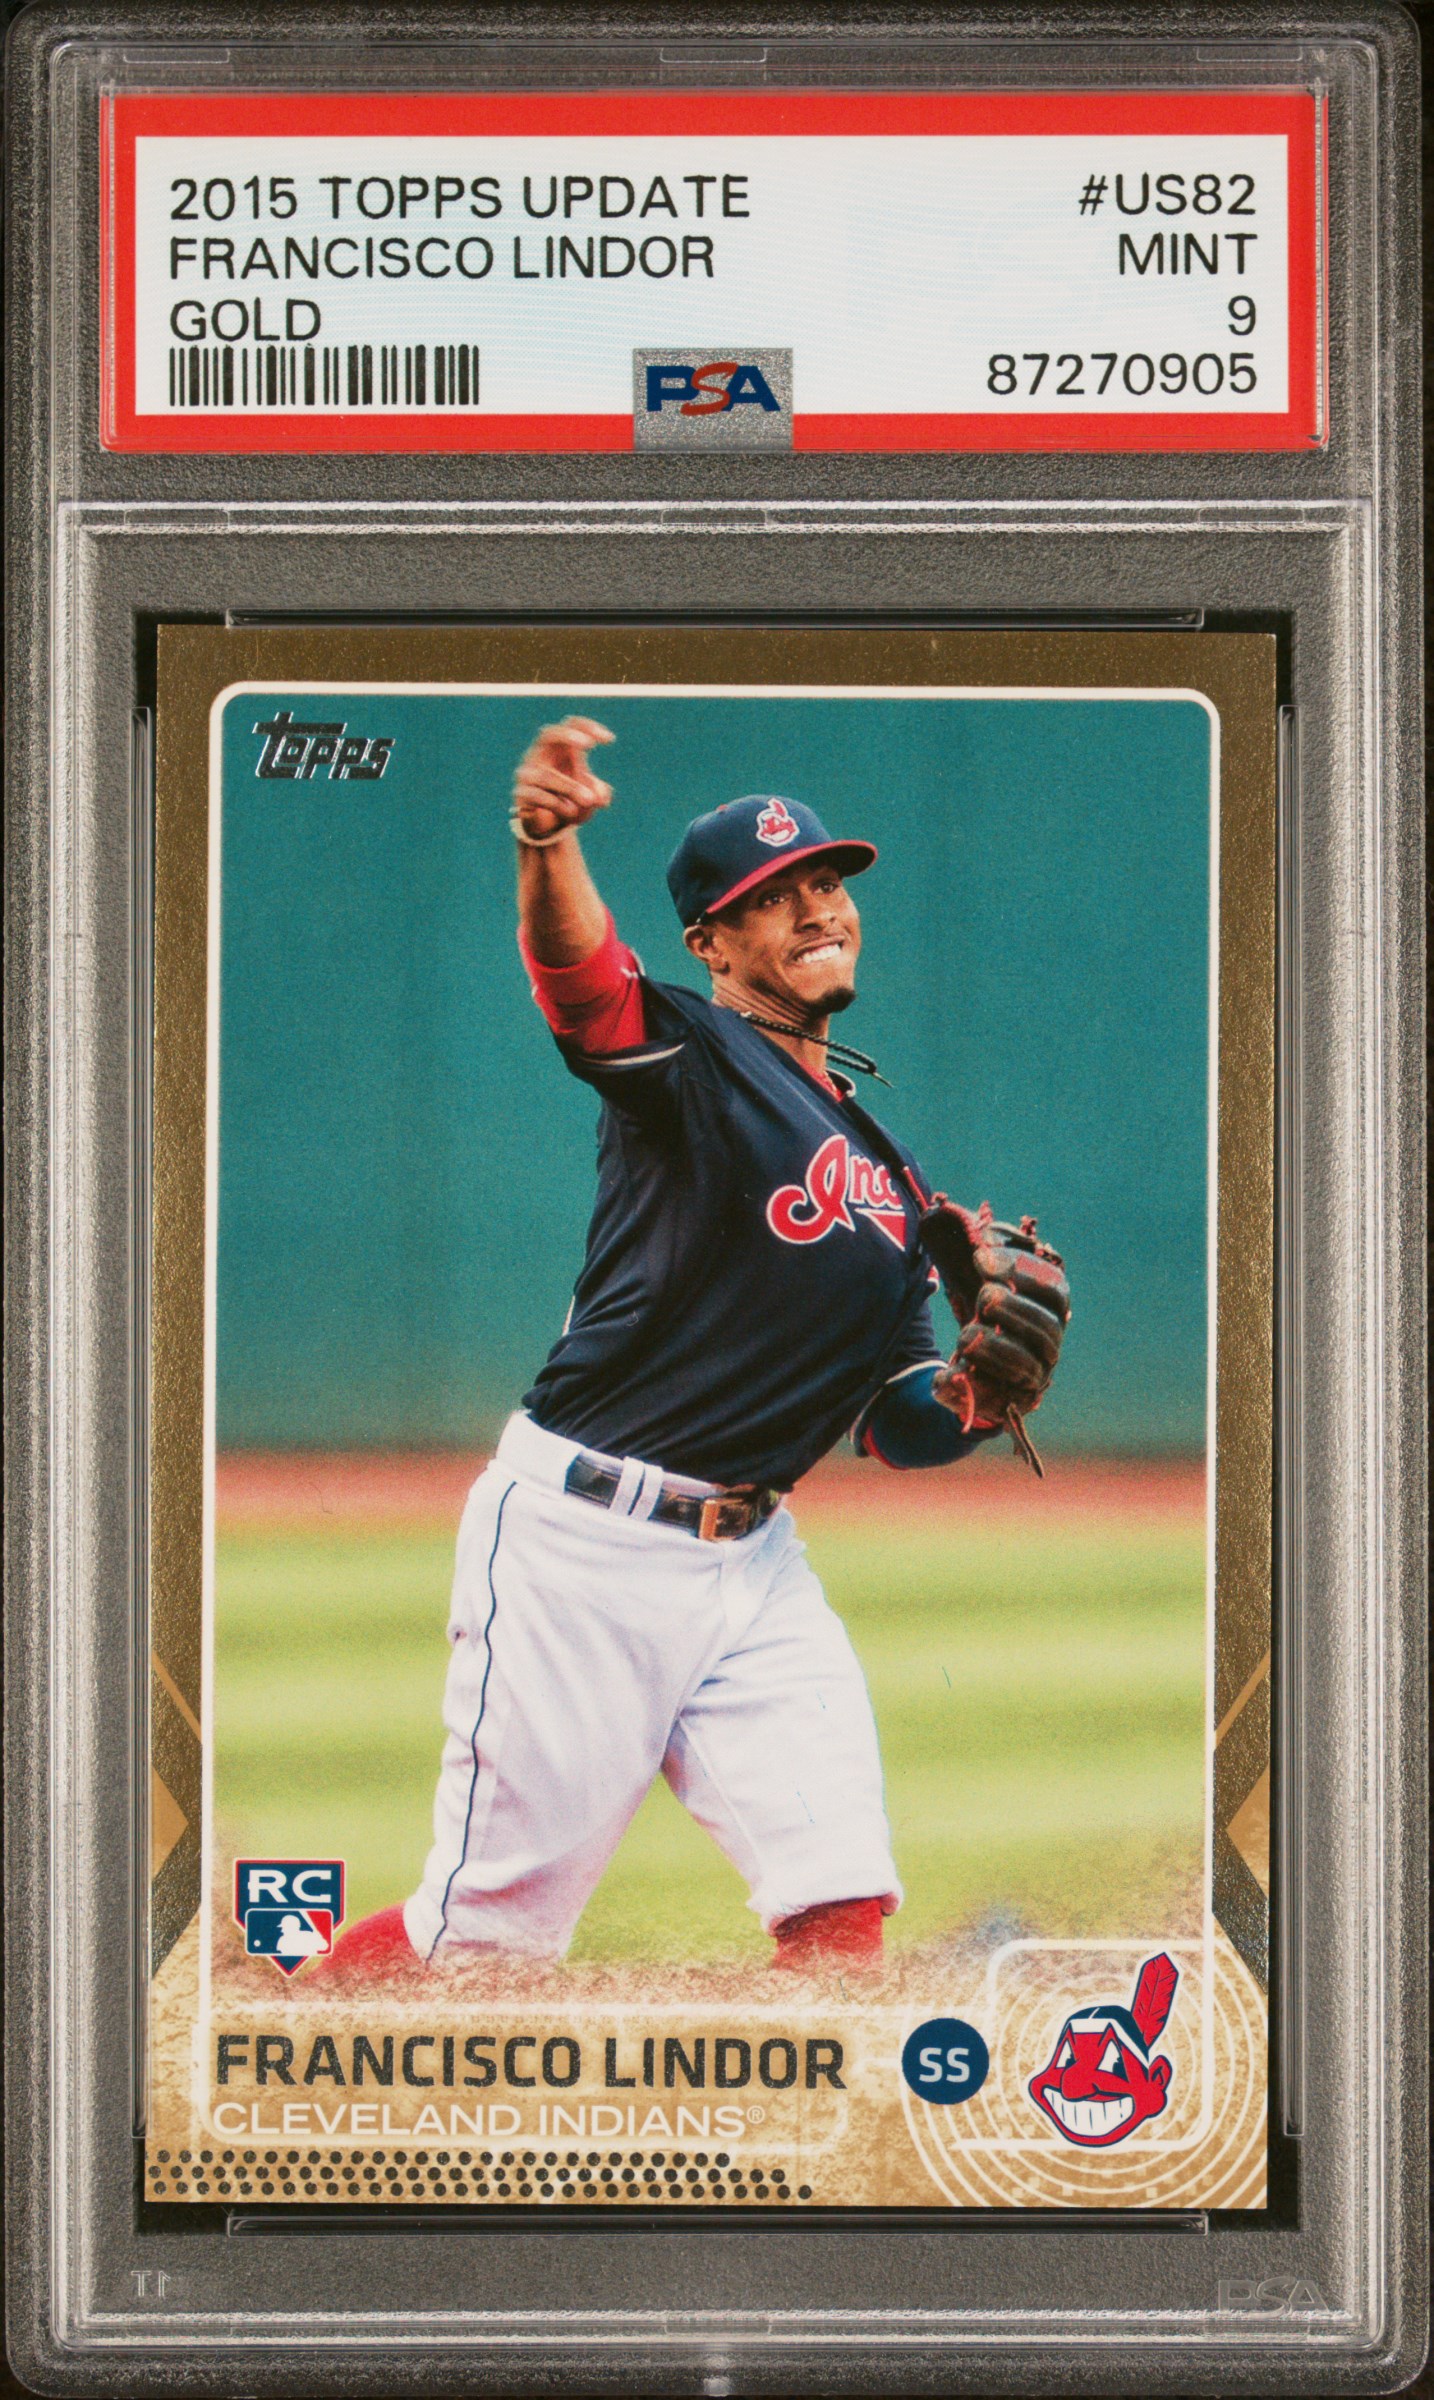 2015 Topps Update Gold #US82 Francisco Lindor Rookie Card (#081/2018)– PSA MINT 9